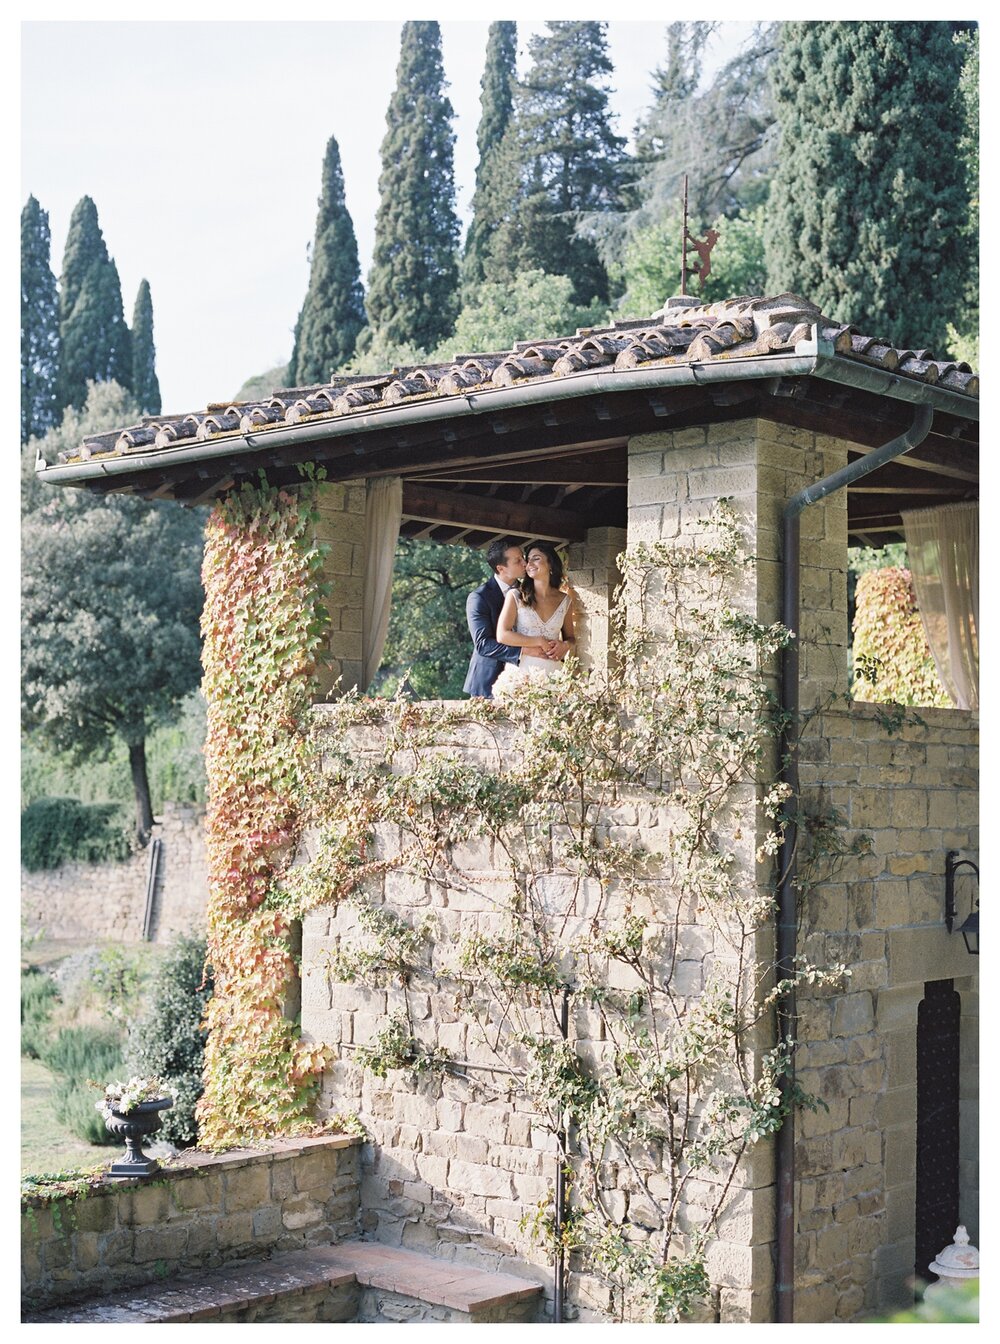  bride and groom photos at villa le fontanelle in florence tuscany, italy wedding villas, tuscany wedding venue, florence wedding italy, florence wedding photography, tuscany wedding photos, tuscany wedding villa, tuscany wedding ideas 